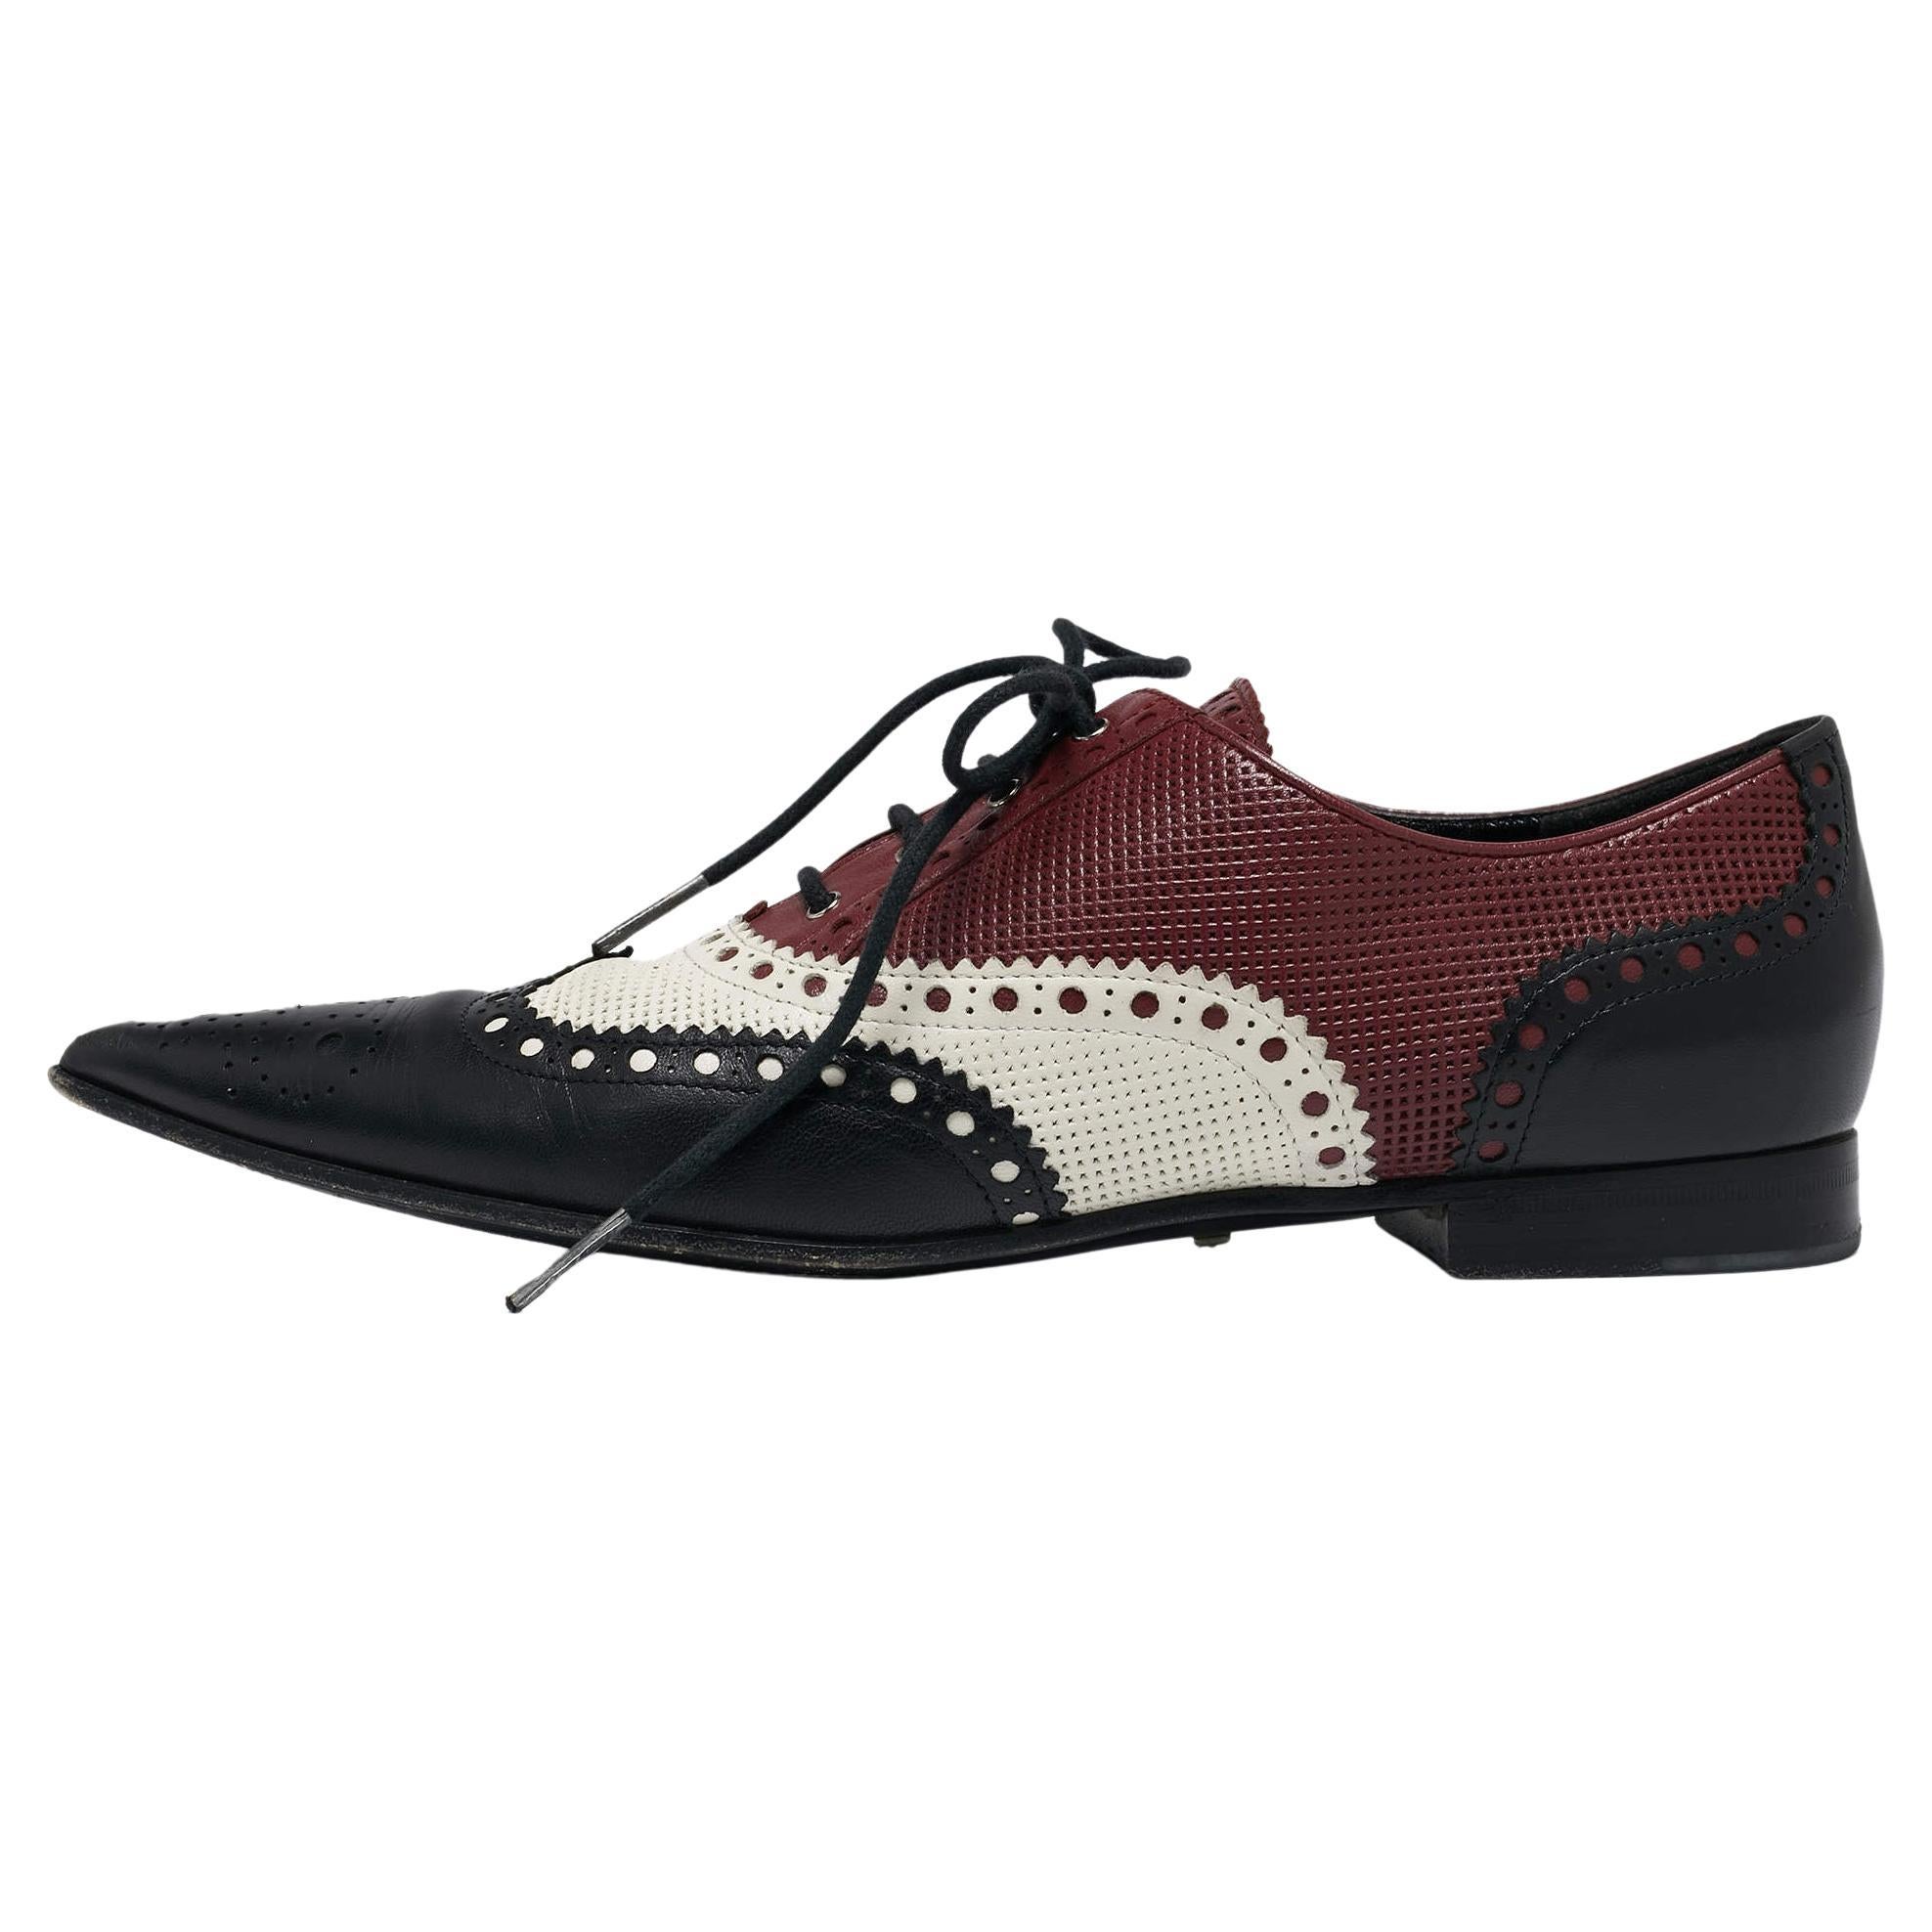 Gucci Multicolor Leather Pointed Toe Brogue Oxford Size 36 For Sale